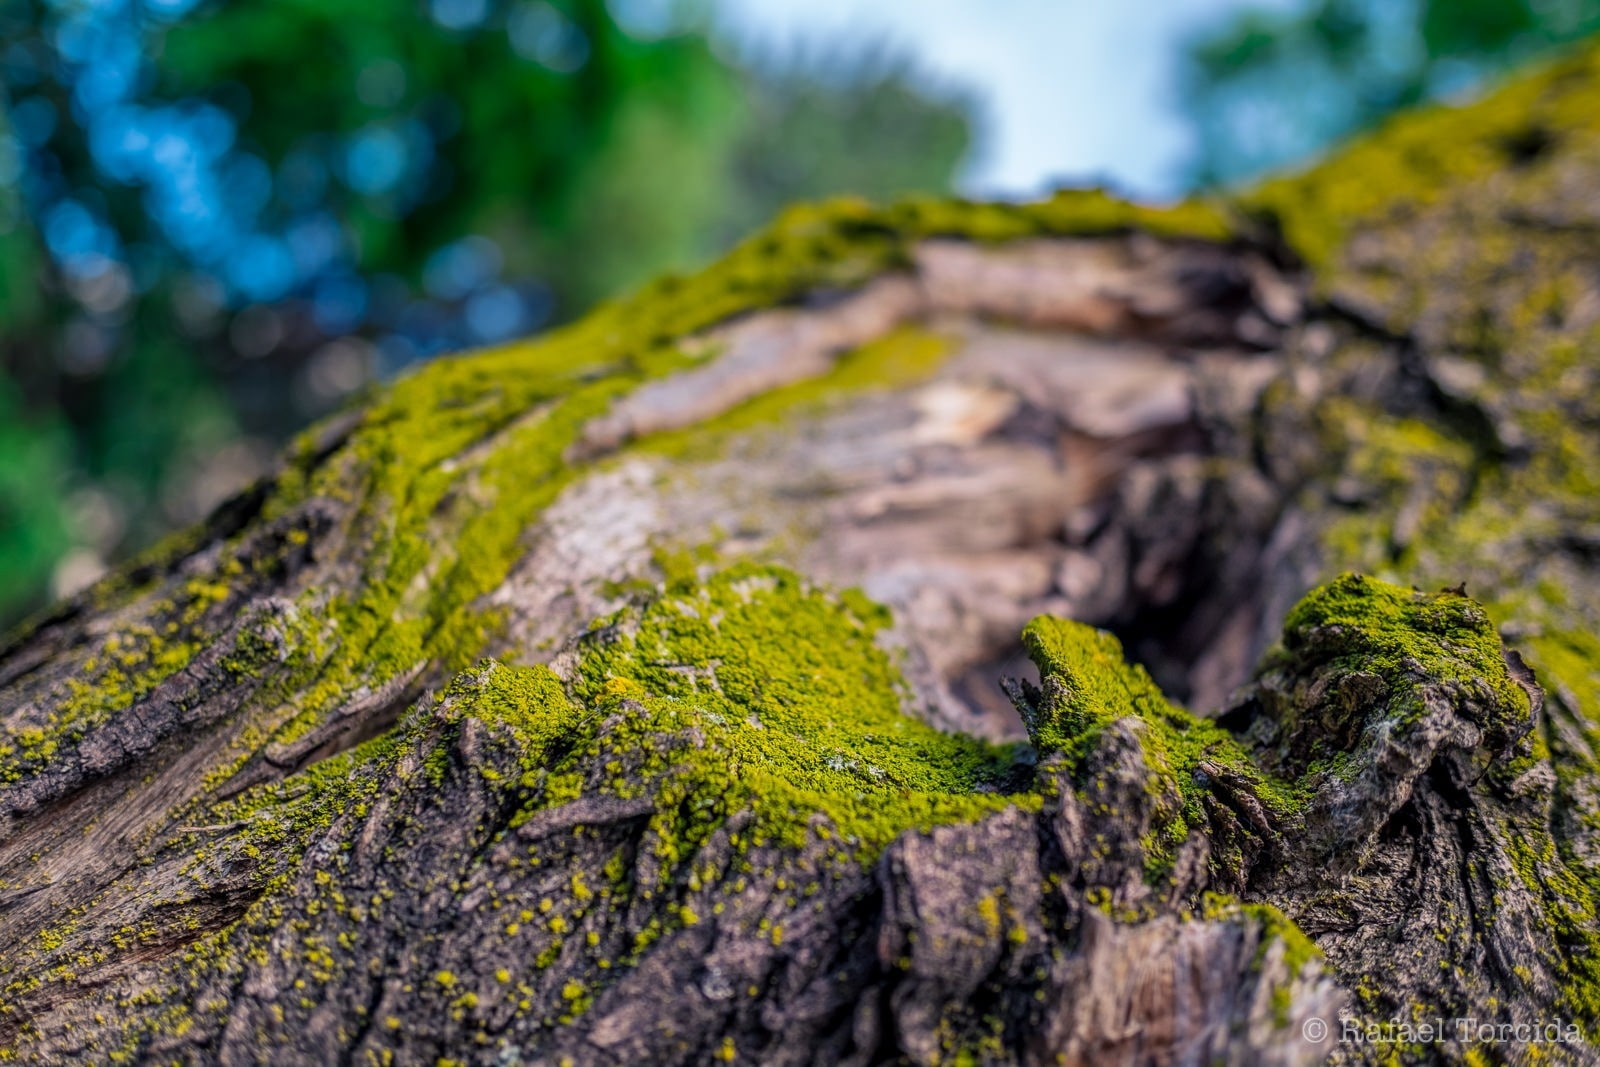 bakeh, wood, old tree, Nature, moss, plant, textured, close-up